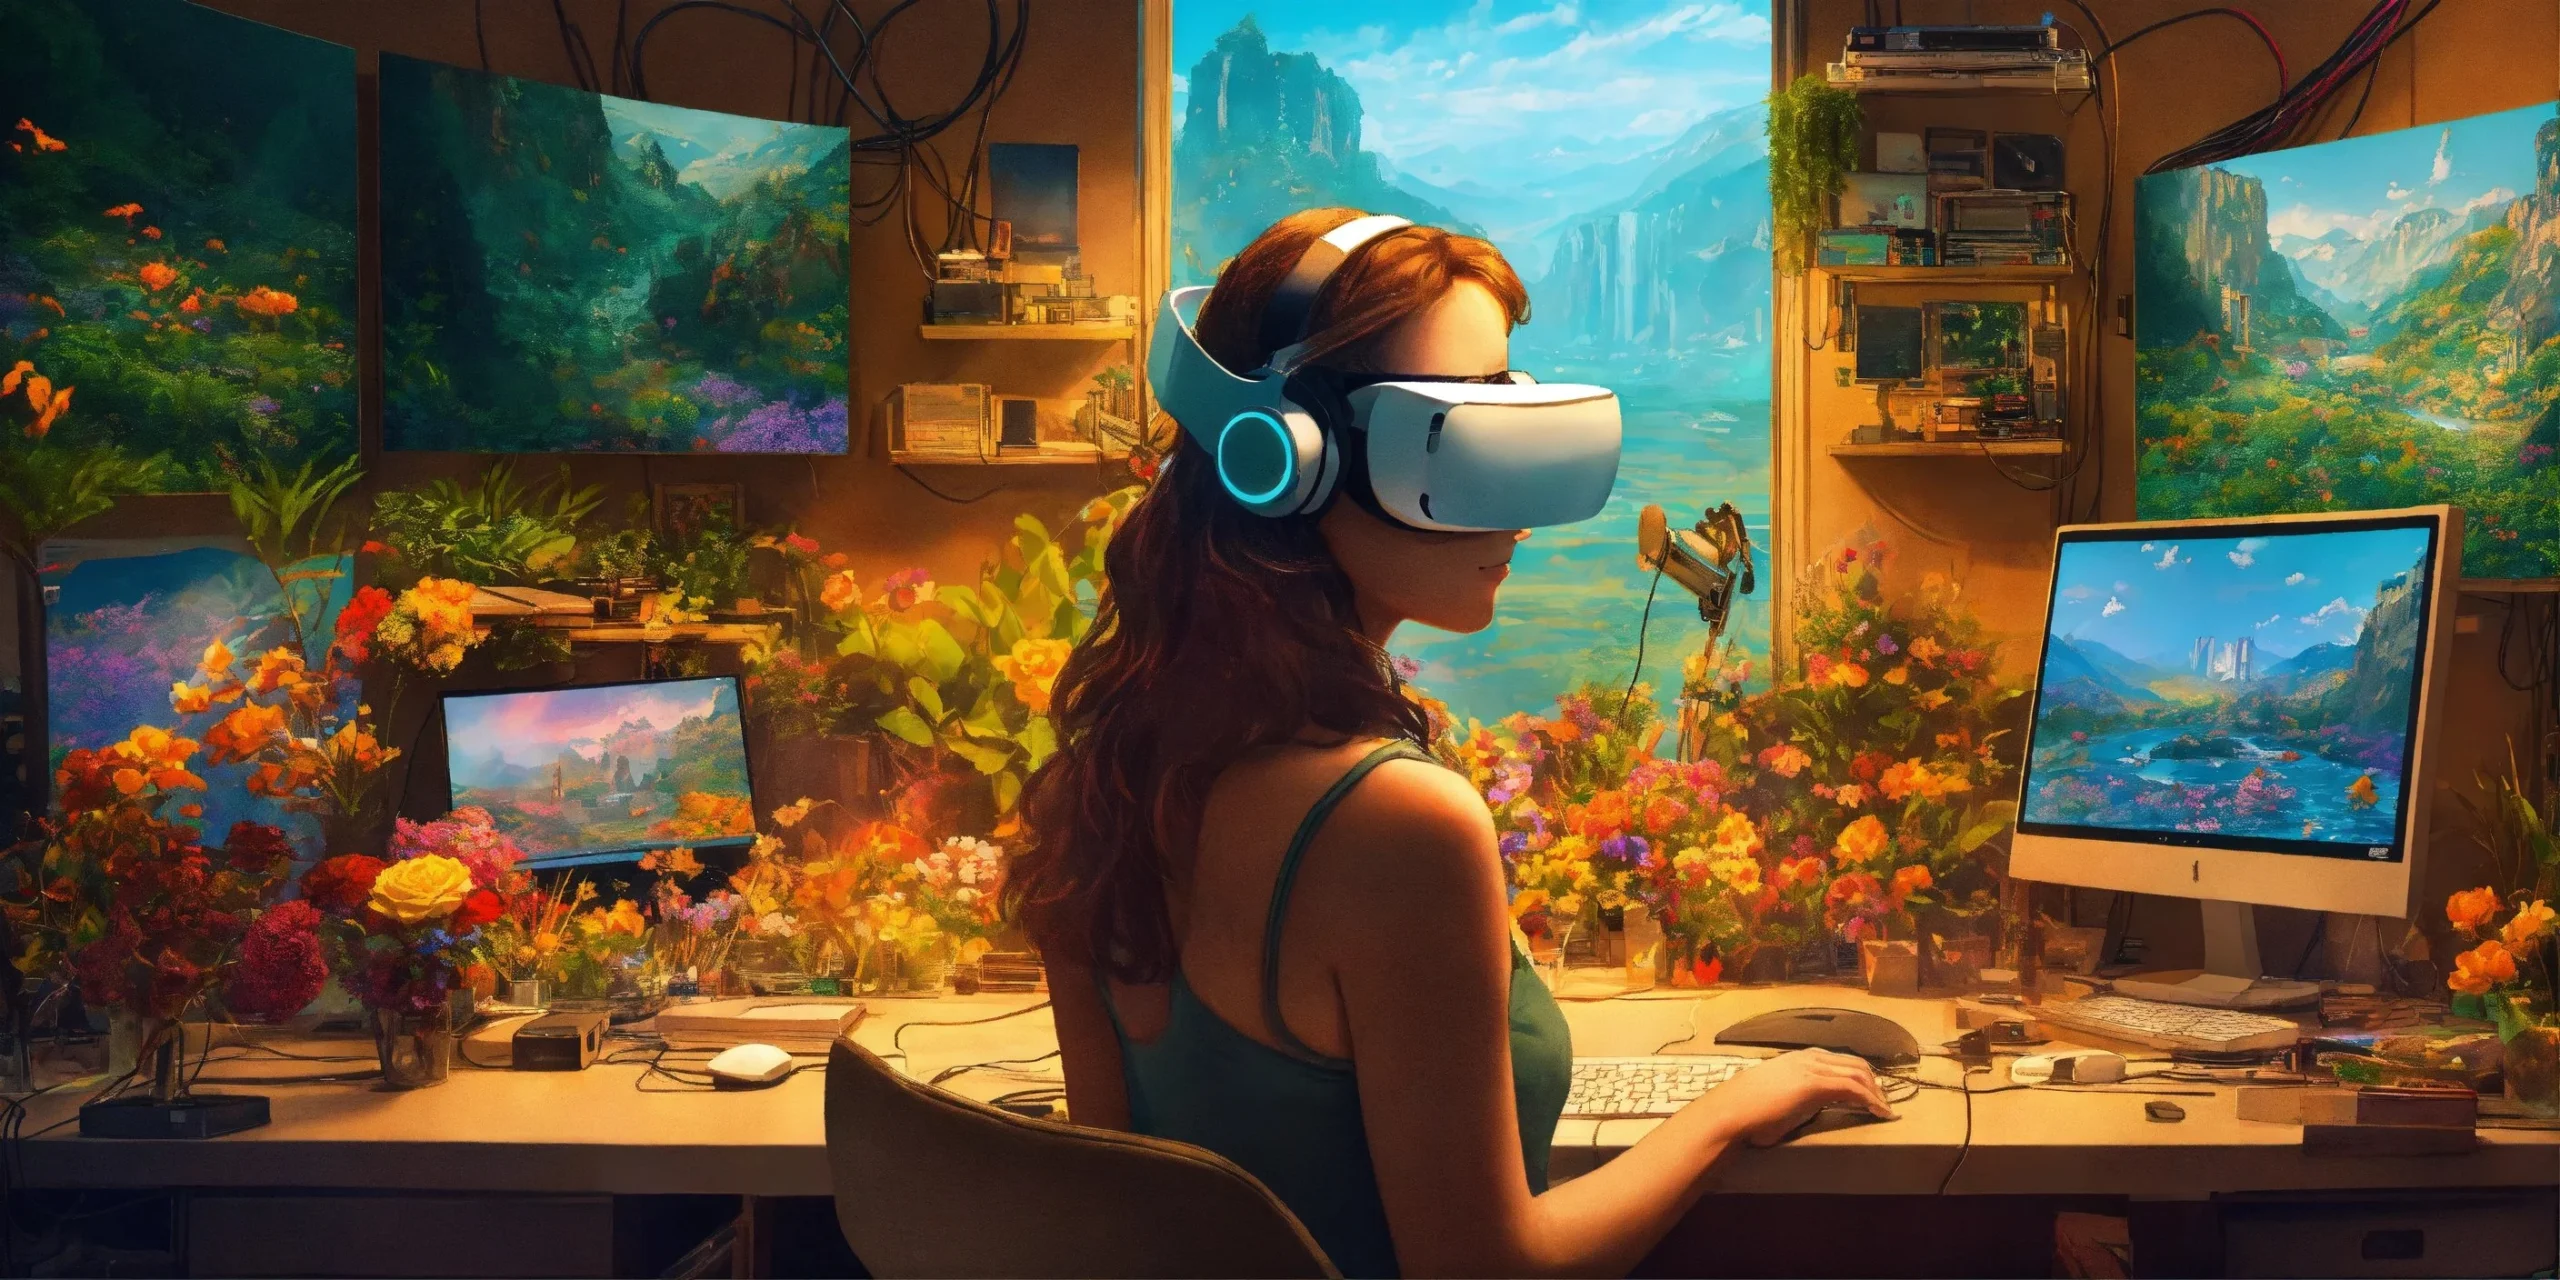 Meta Quest 2 will allow you to experience virtual reality like never before